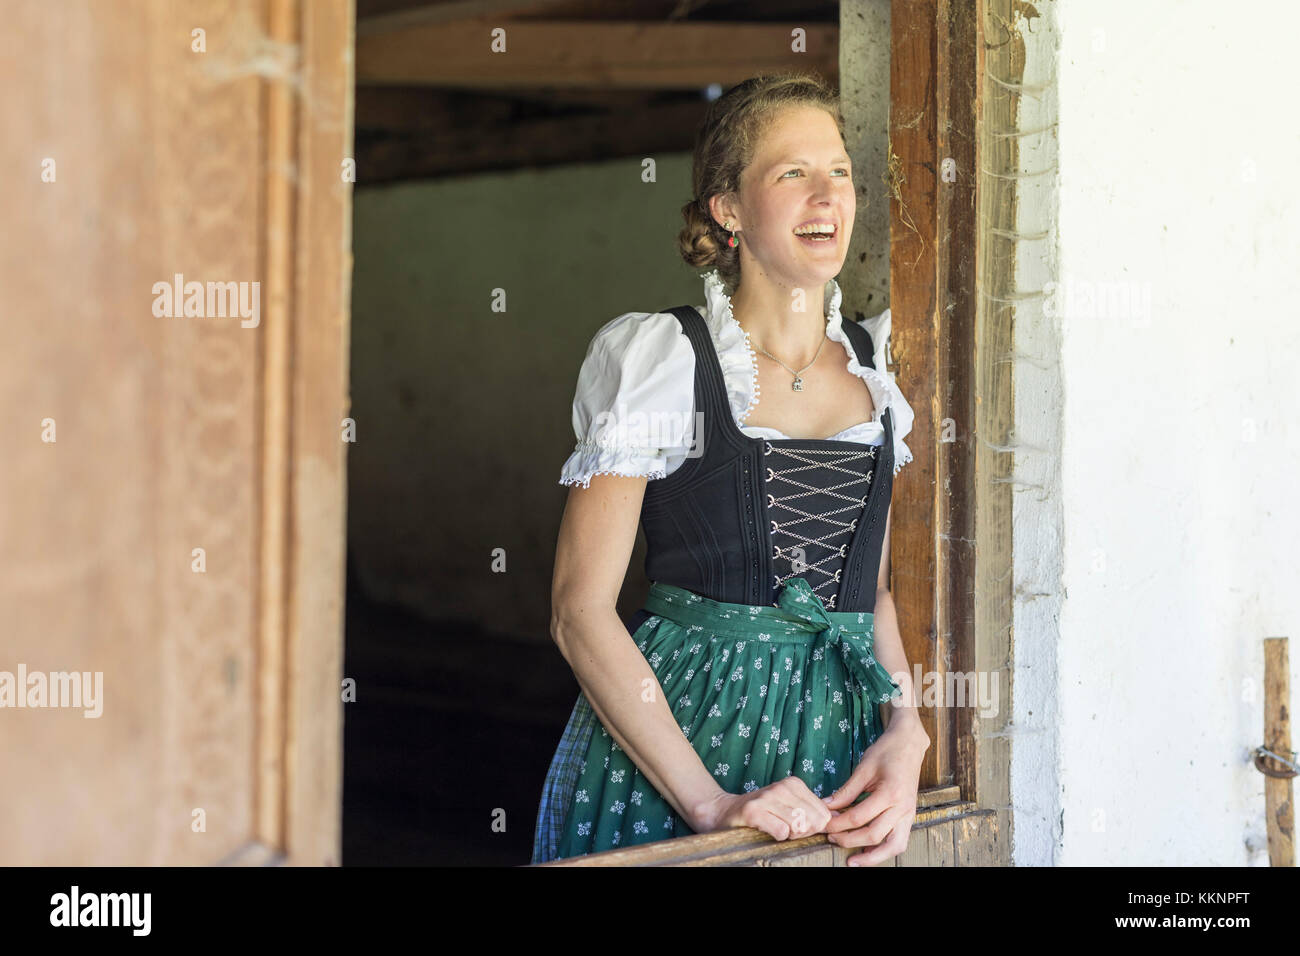 Countrywoman with dirndl looks out of a barn door Stock Photo